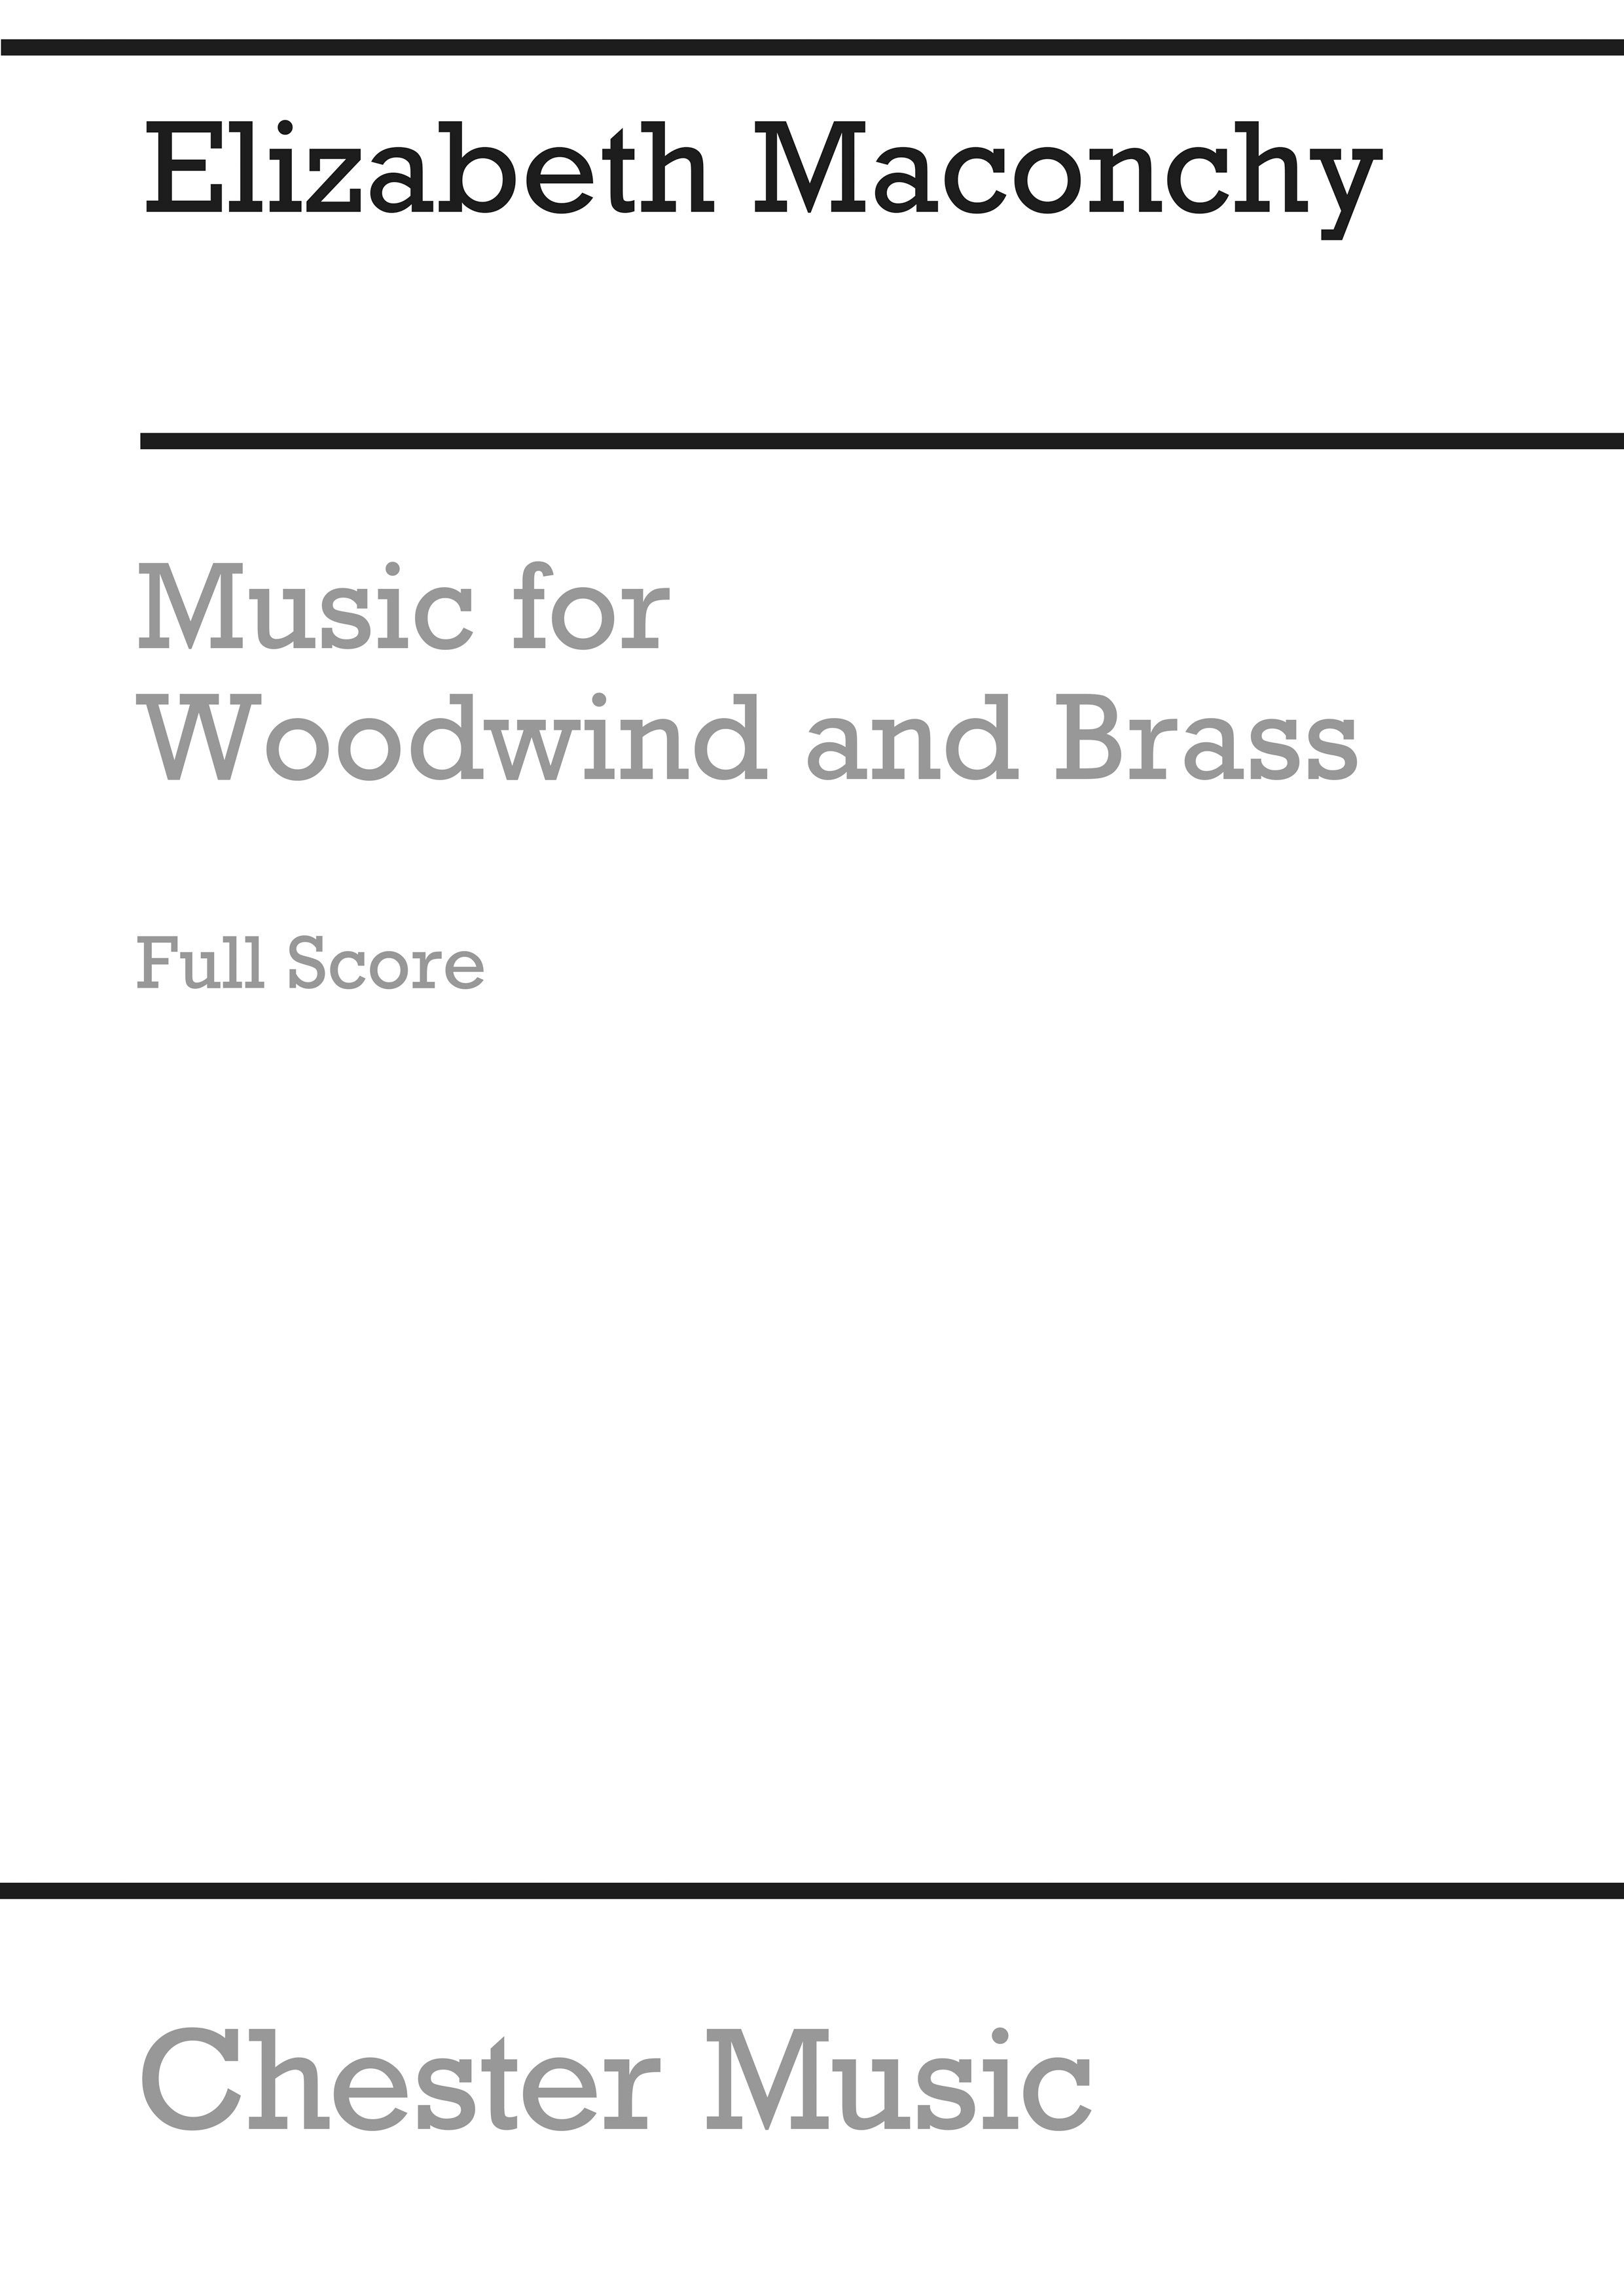 Elizabeth Maconchy: Maconchy Music For Woodwind And Brass (1965) F/s: Orchestra: